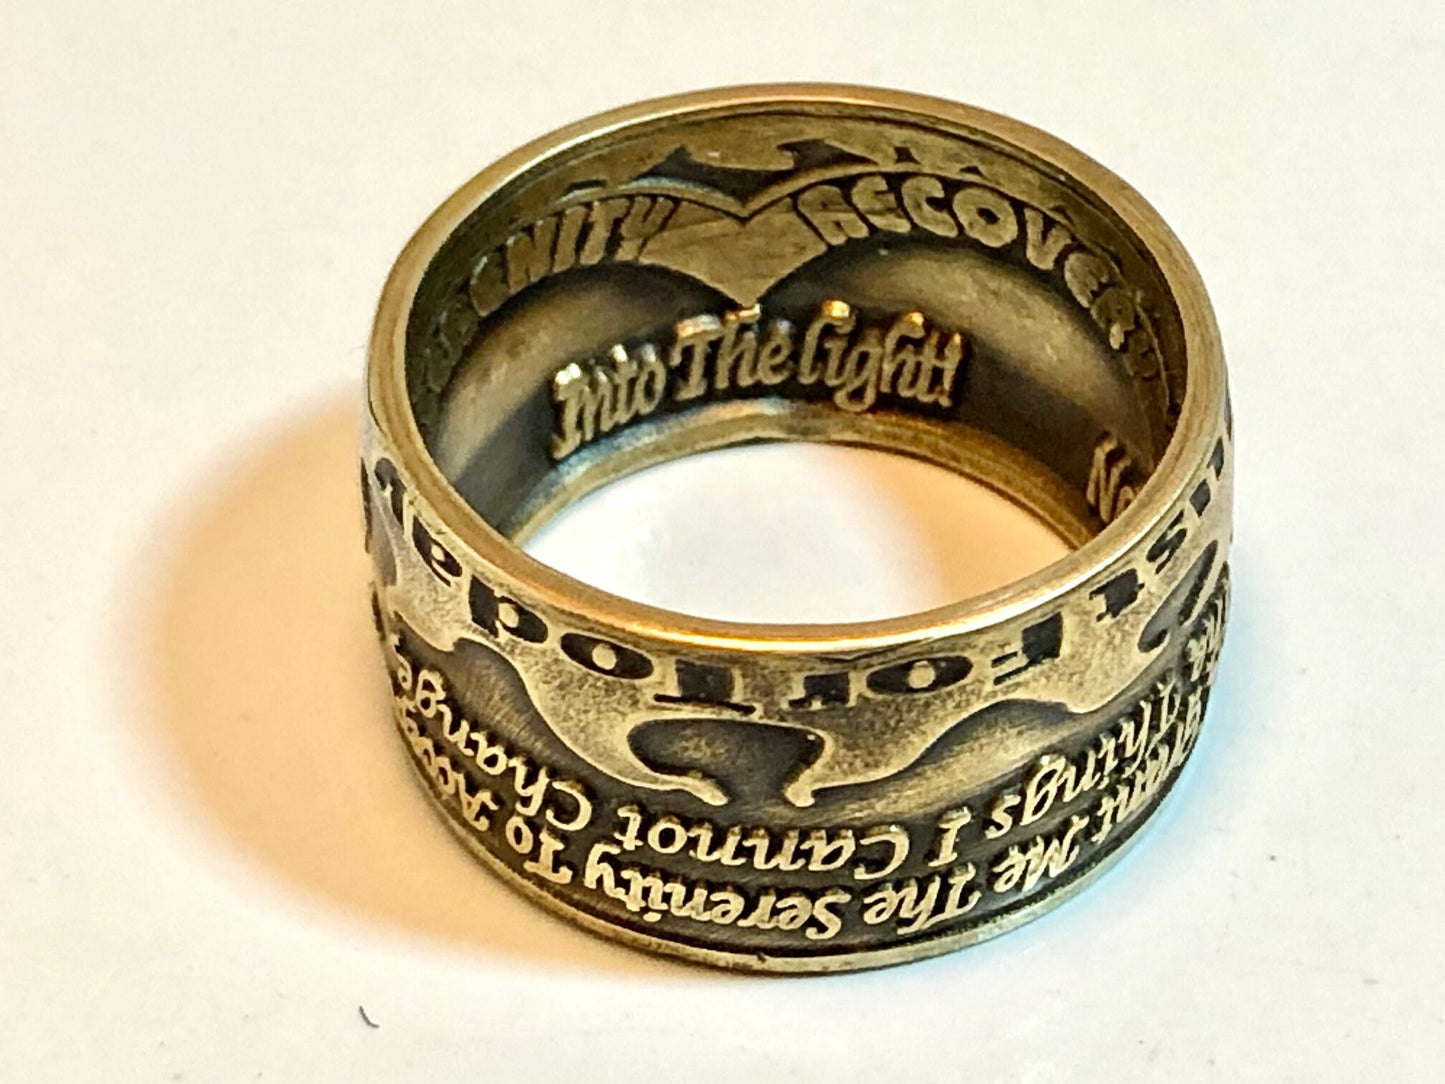 Addiction Coin Ring Serenity Prayer Drugs Alcohol Abuse Sober Recovery Ring Personal Jewelry Ring Gift For Friend Coin Ring Gift For Him Her